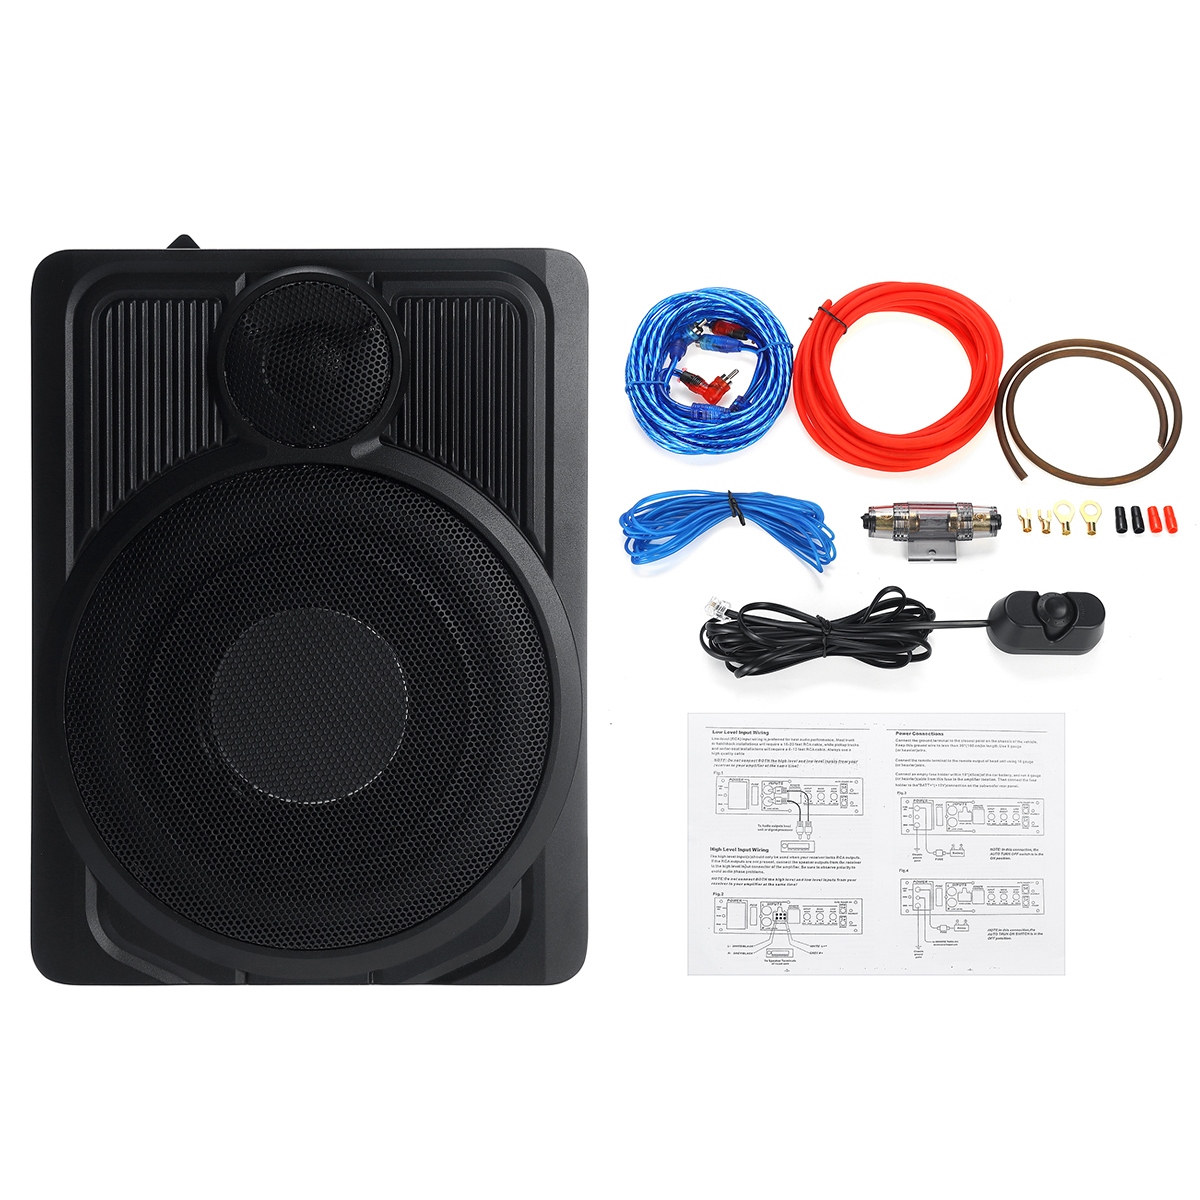 Bakeey-600W-Subwoofer-12V-Car-Ultra-thin-10-inch-With-Tweeter-Subwoofer-Dedicated-Full-range-Subwoof-1746877-8